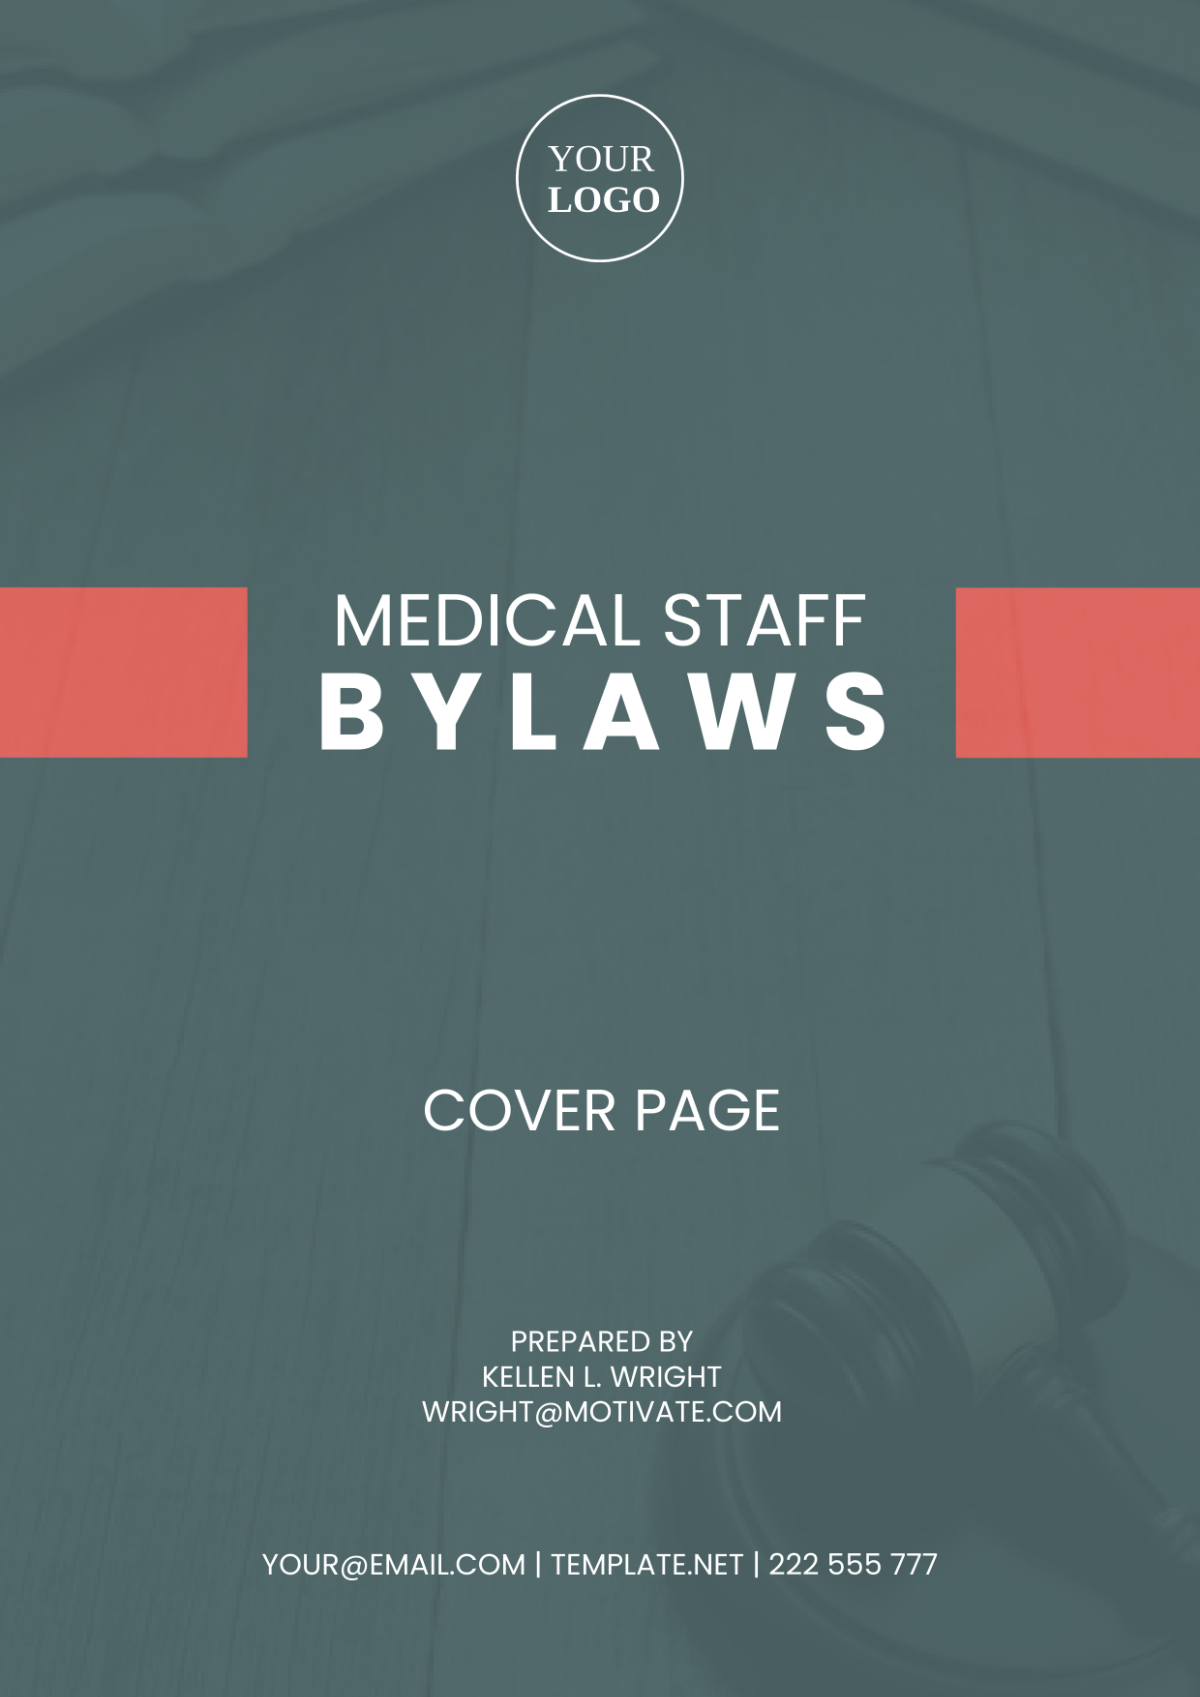 Medical Staff Bylaws Cover Page Template